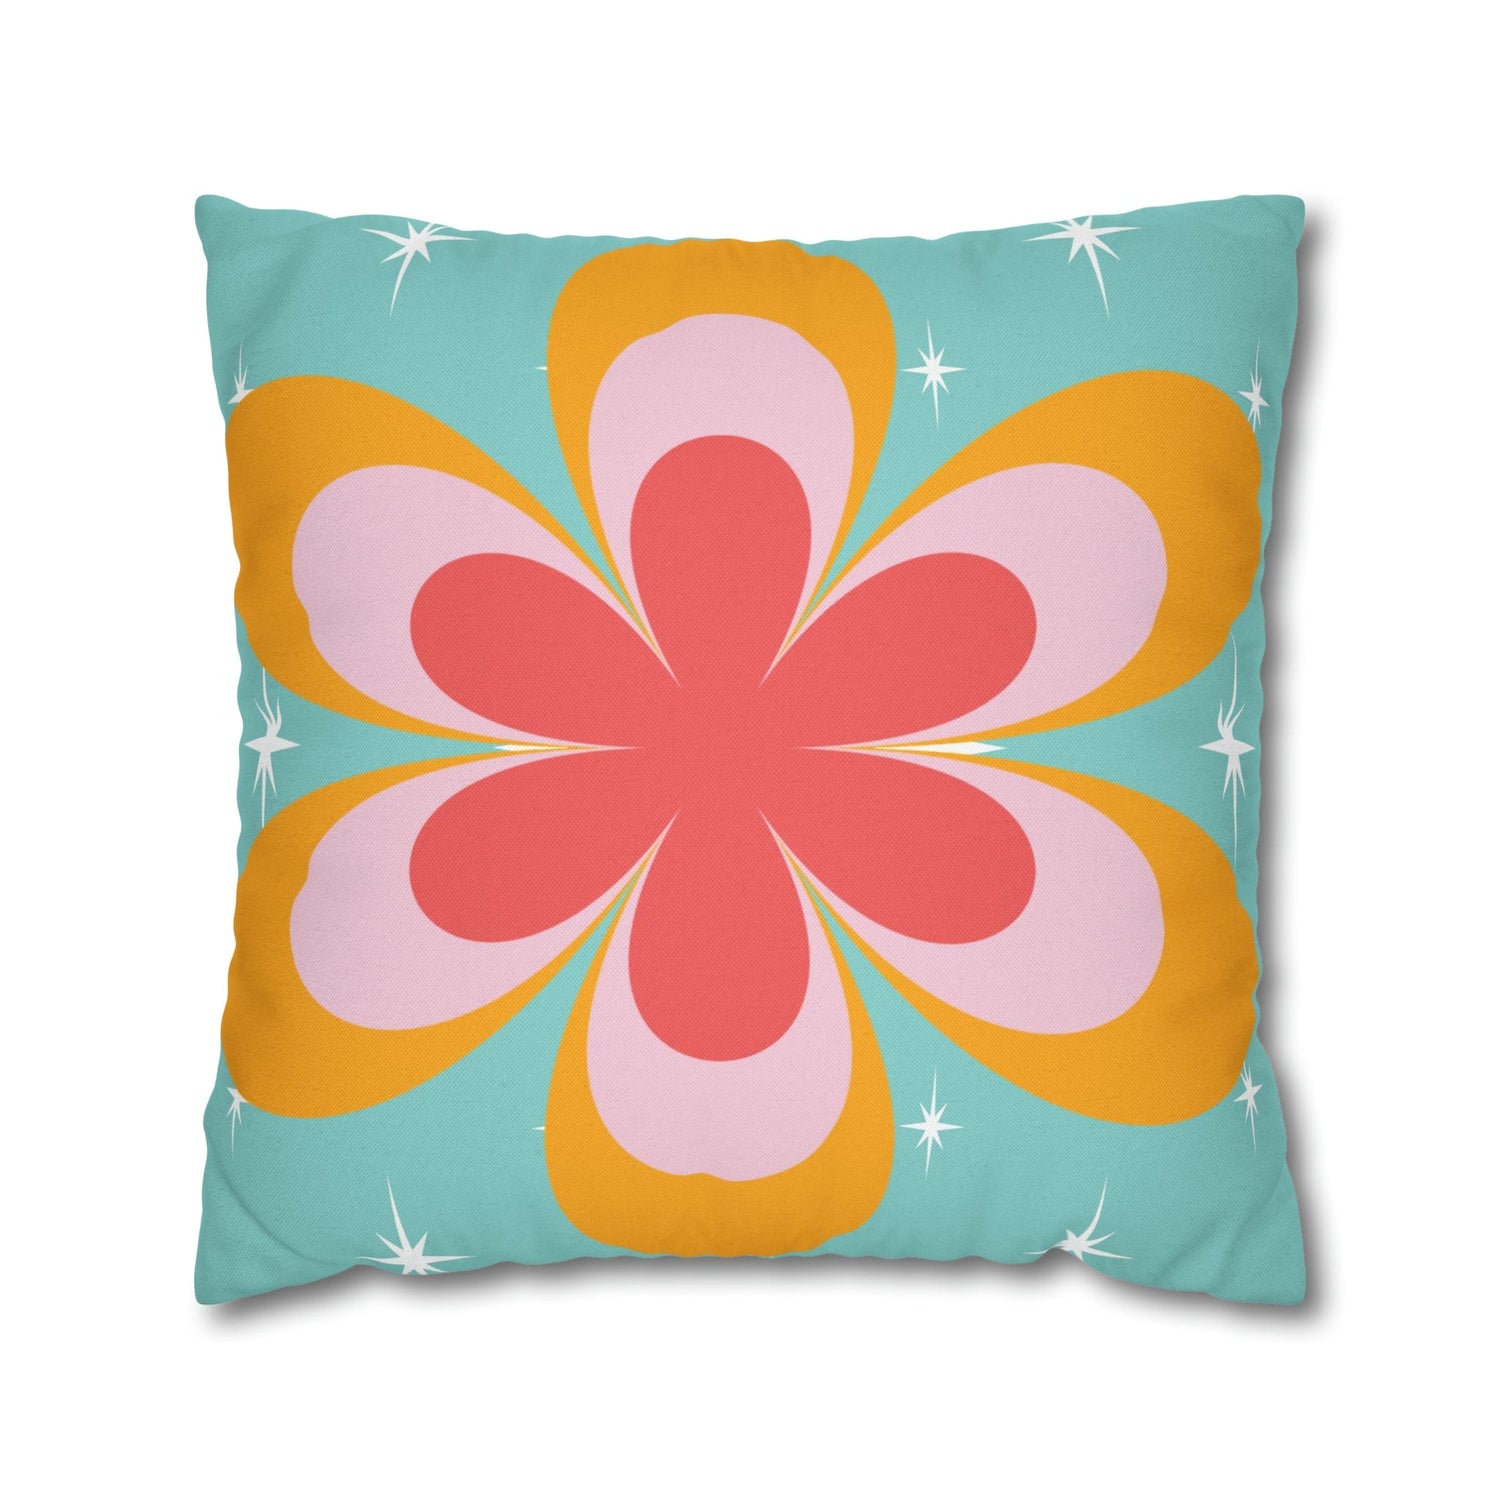 Printify Retro Groovy Daisy Flower Power Throw Pillowcase, Mid Century Modern Starburst Coral, Aqua Blue, Mustard Yellow Accent Pillow Cover Home Decor 20&quot; × 20&quot; 13598868238530685717